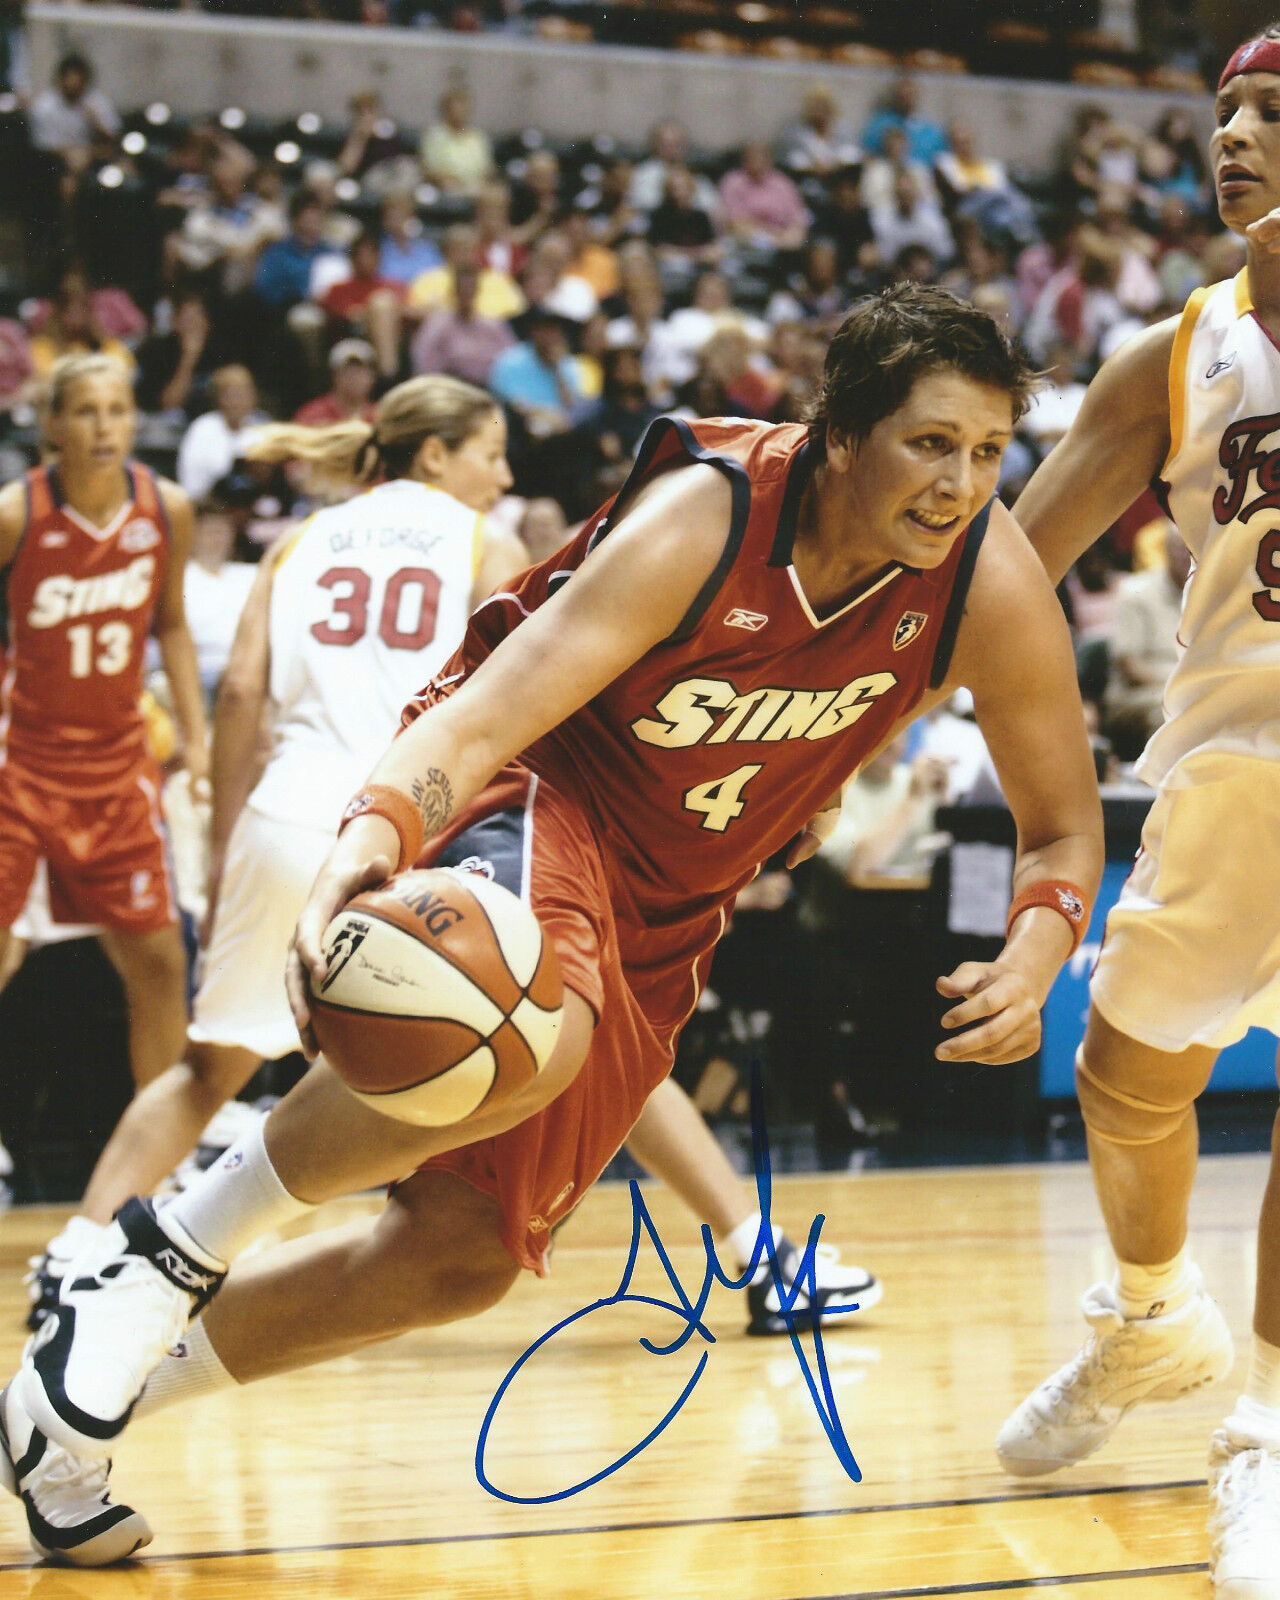 **GFA Charlotte Sting *JANEL MCCARVILLE* Signed 8x10 Photo Poster painting J2 COA**